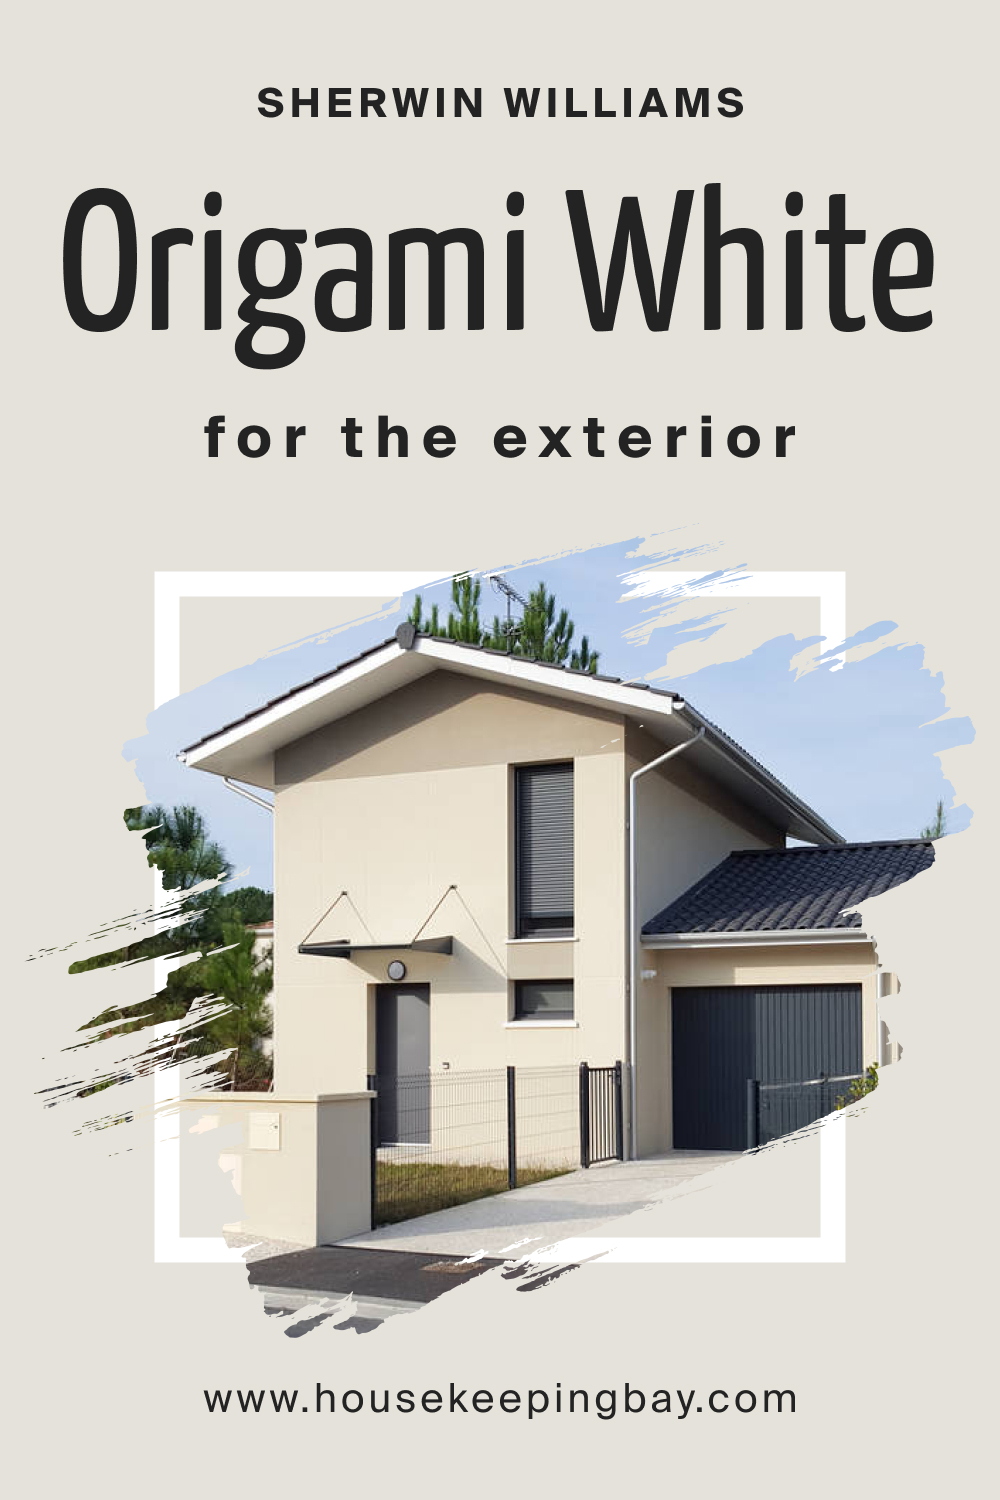 Sherwin Williams. Origami White SW 7636 For the exterior